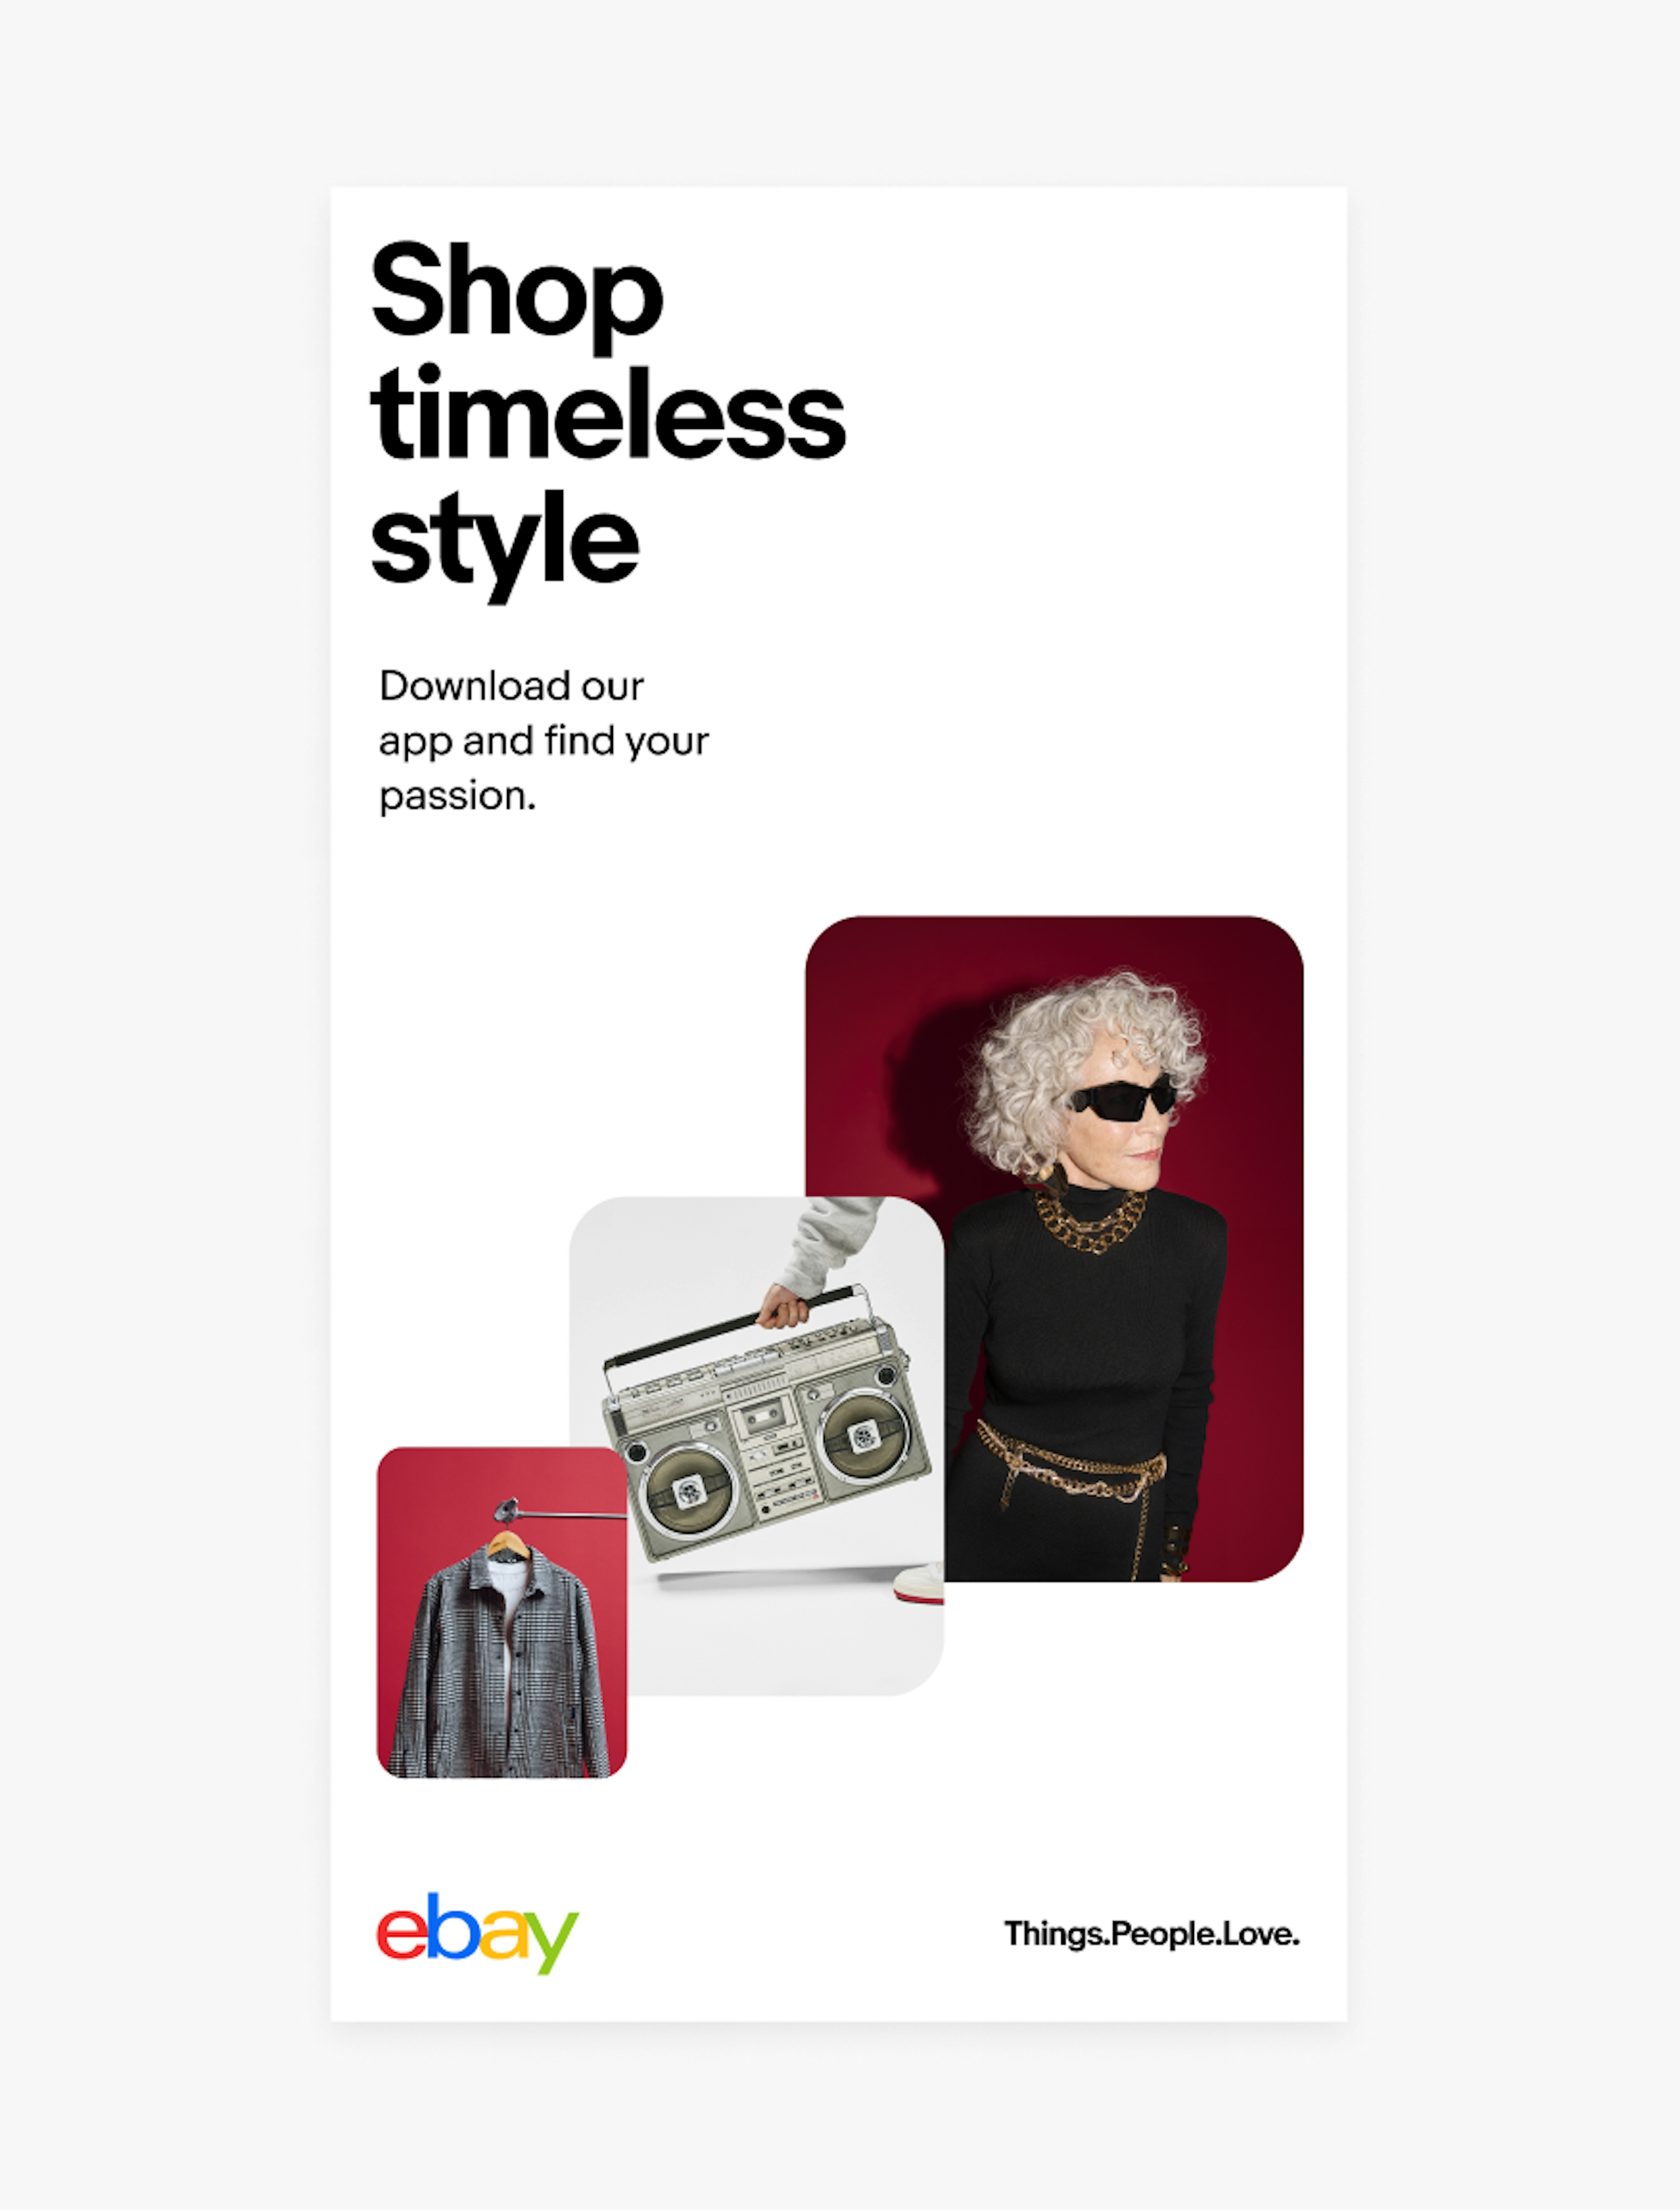 A vertical eBay ad with a white background. The title “Shop timeless style” and subtitle “Download our app and find your passion” are in the upper left. The eBay logo is in the bottom left and tagline “Things.People.Love.” bottom right. Three colorful images move in a diagonal way from the bottom left to the right right.